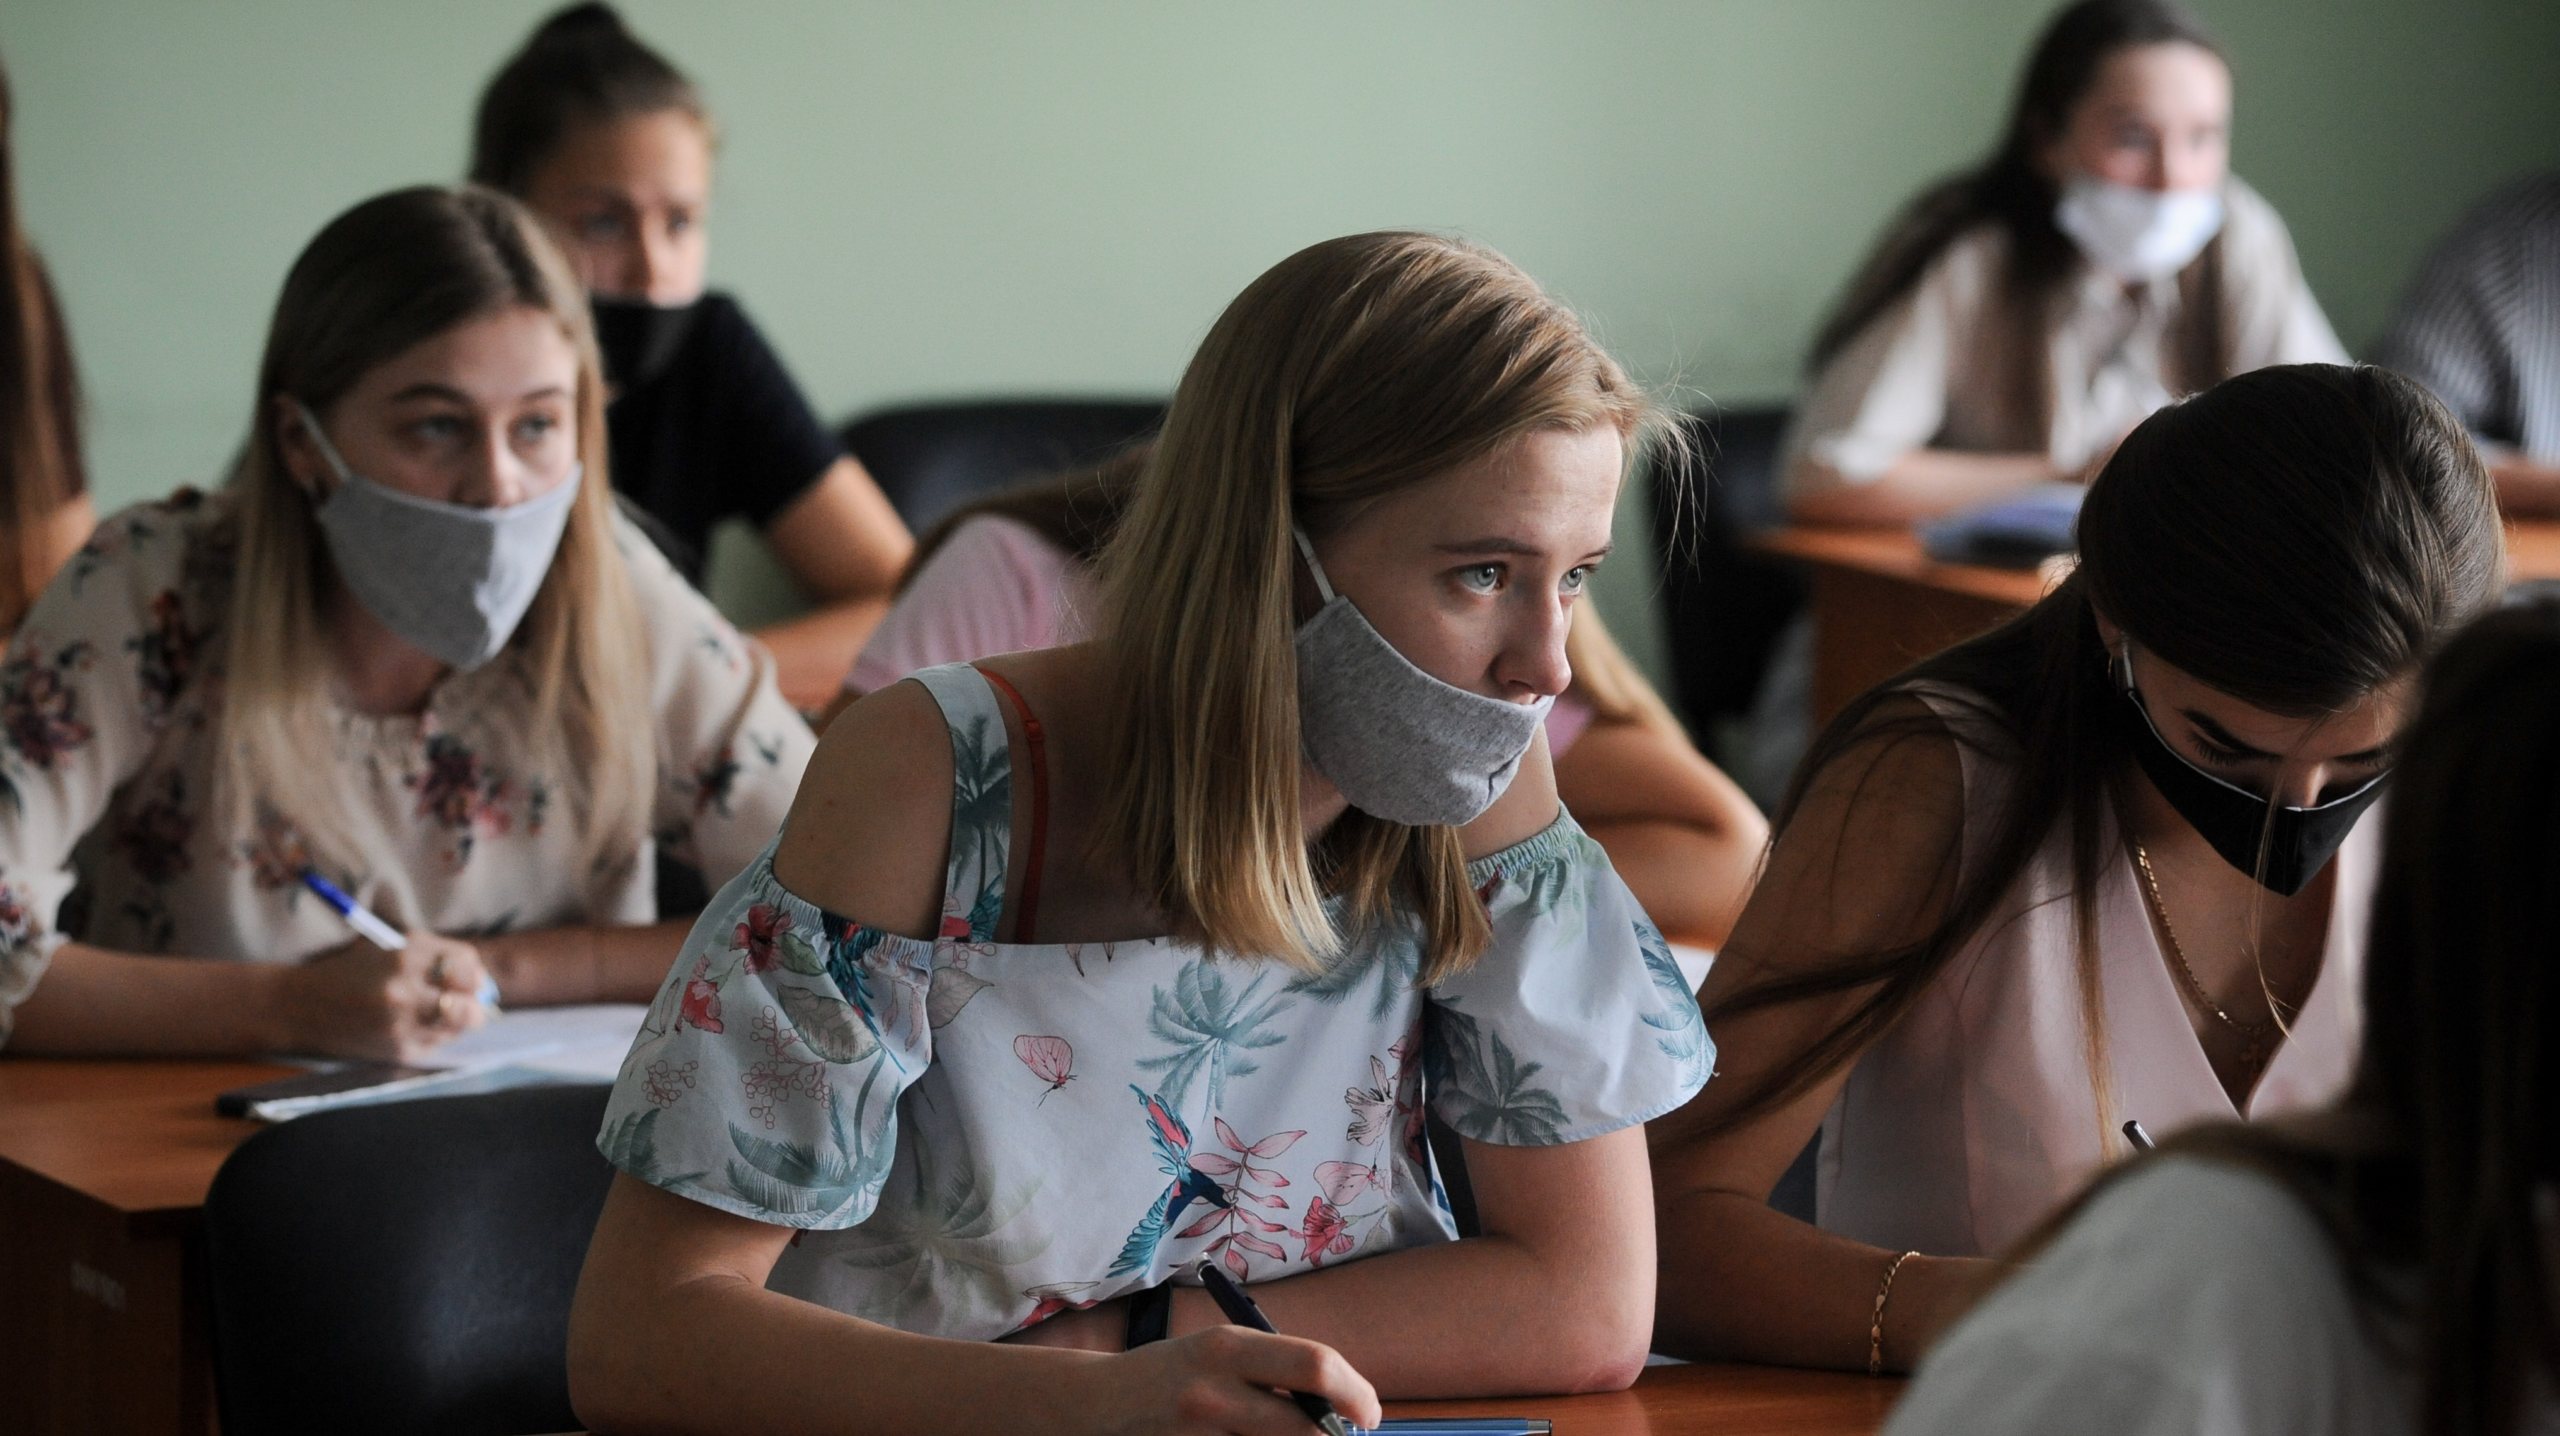 Female students of Tambov University are seen wearing